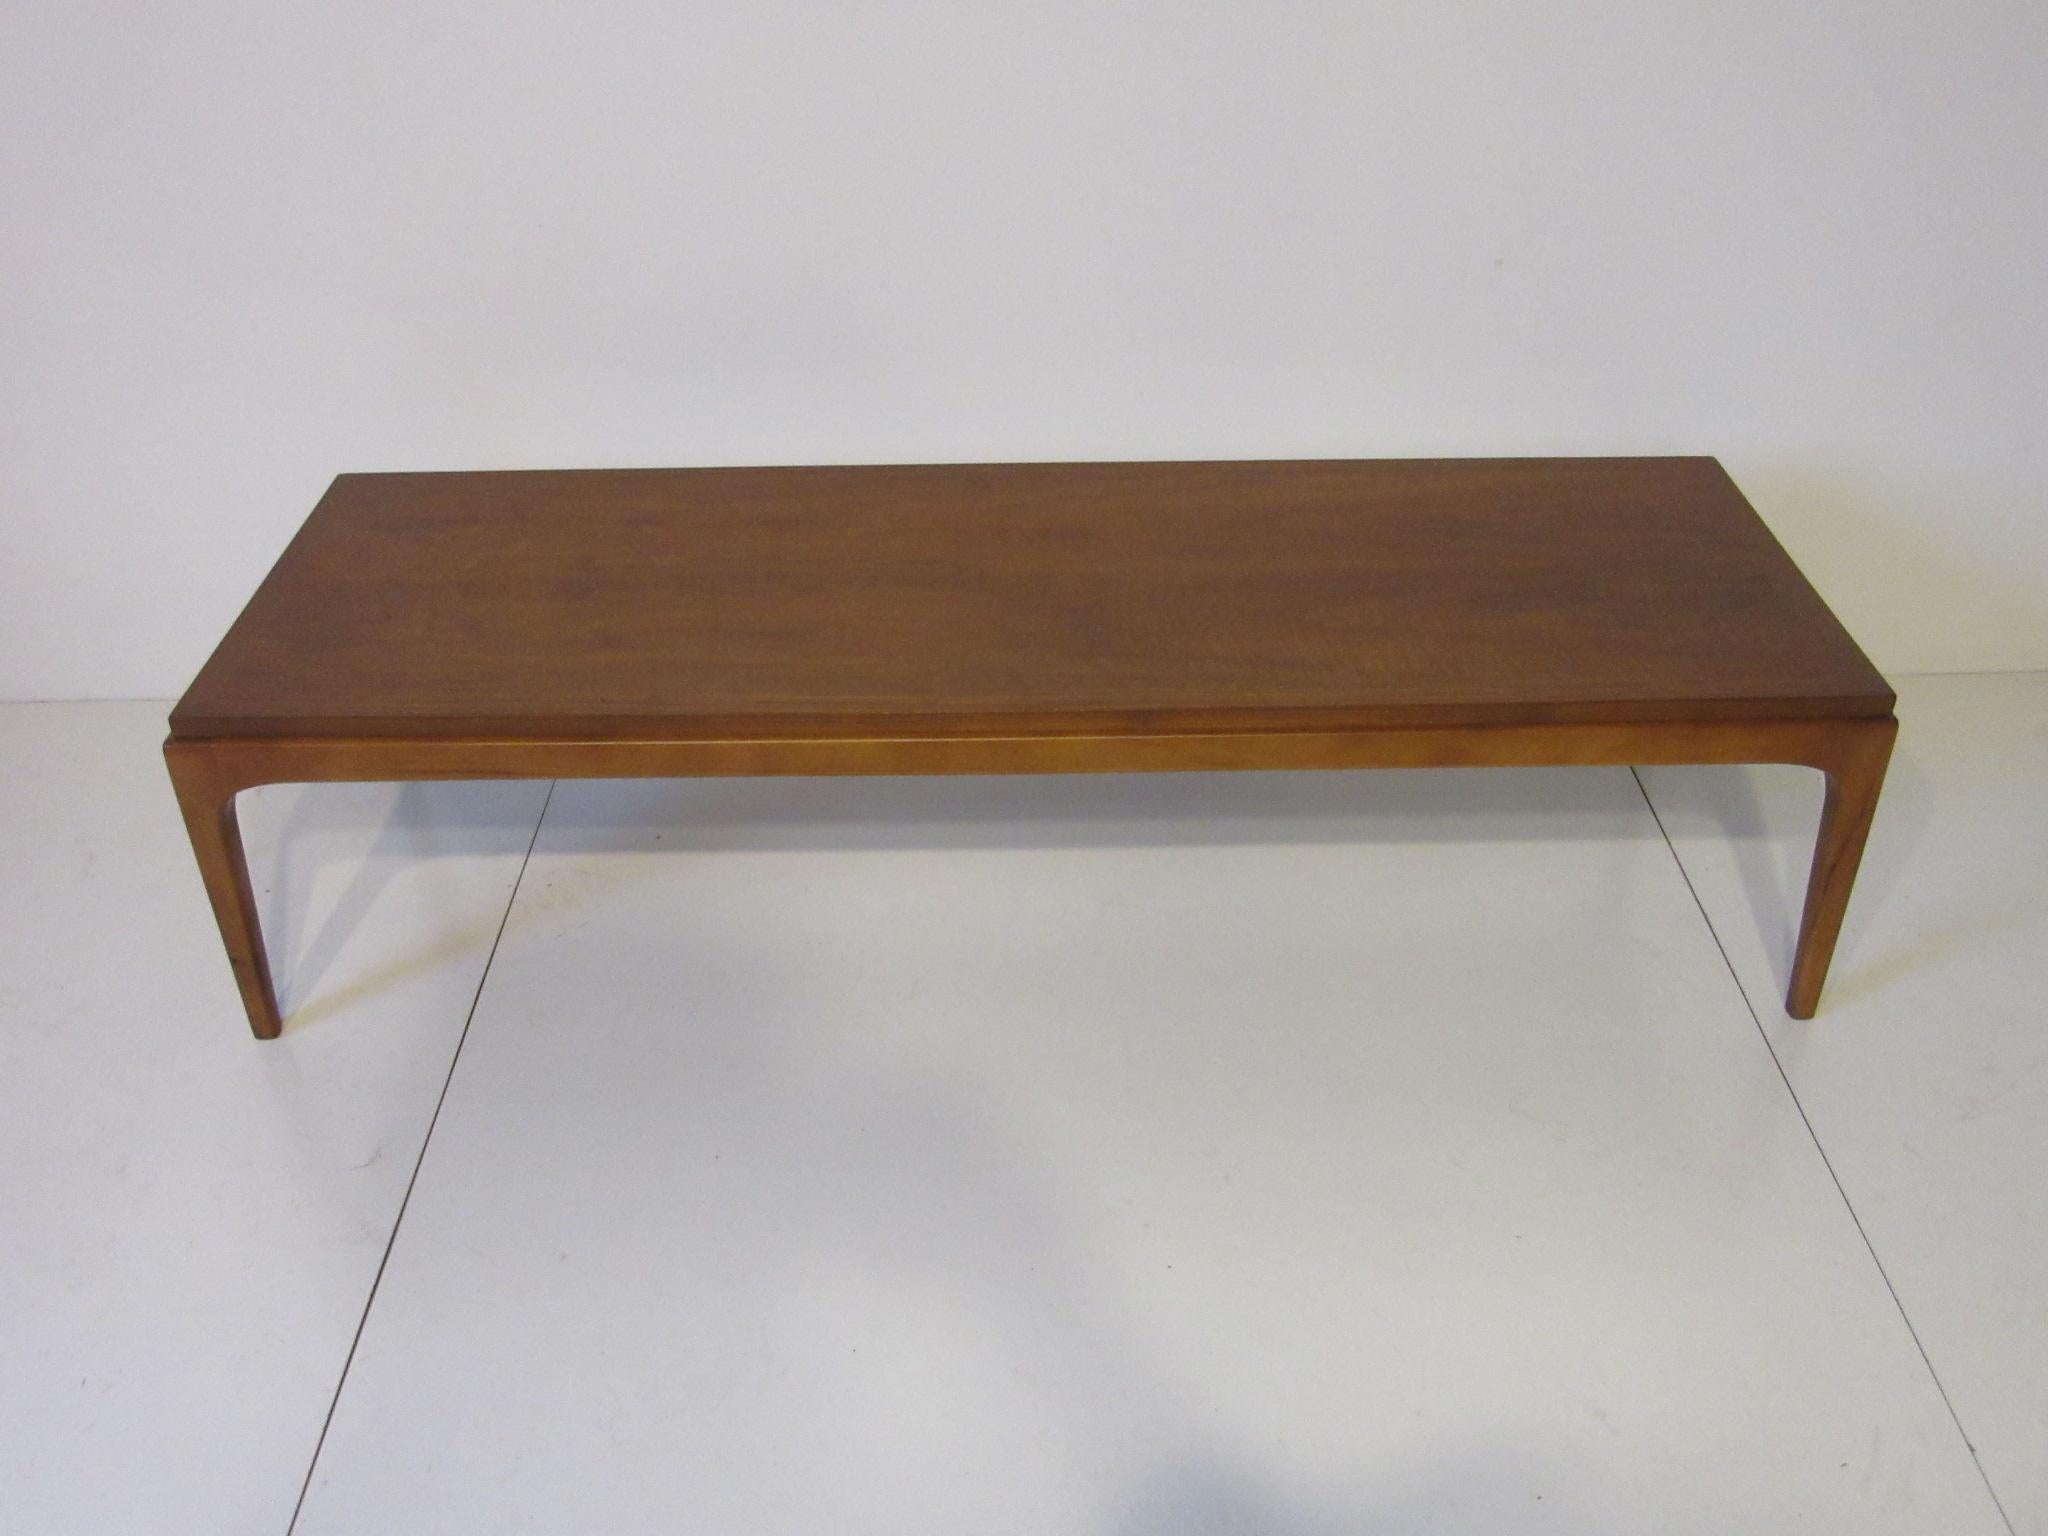 A medium toned walnut midcentury coffee table with a nice thin profile and solid construction, manufactured by Lane Altavista.